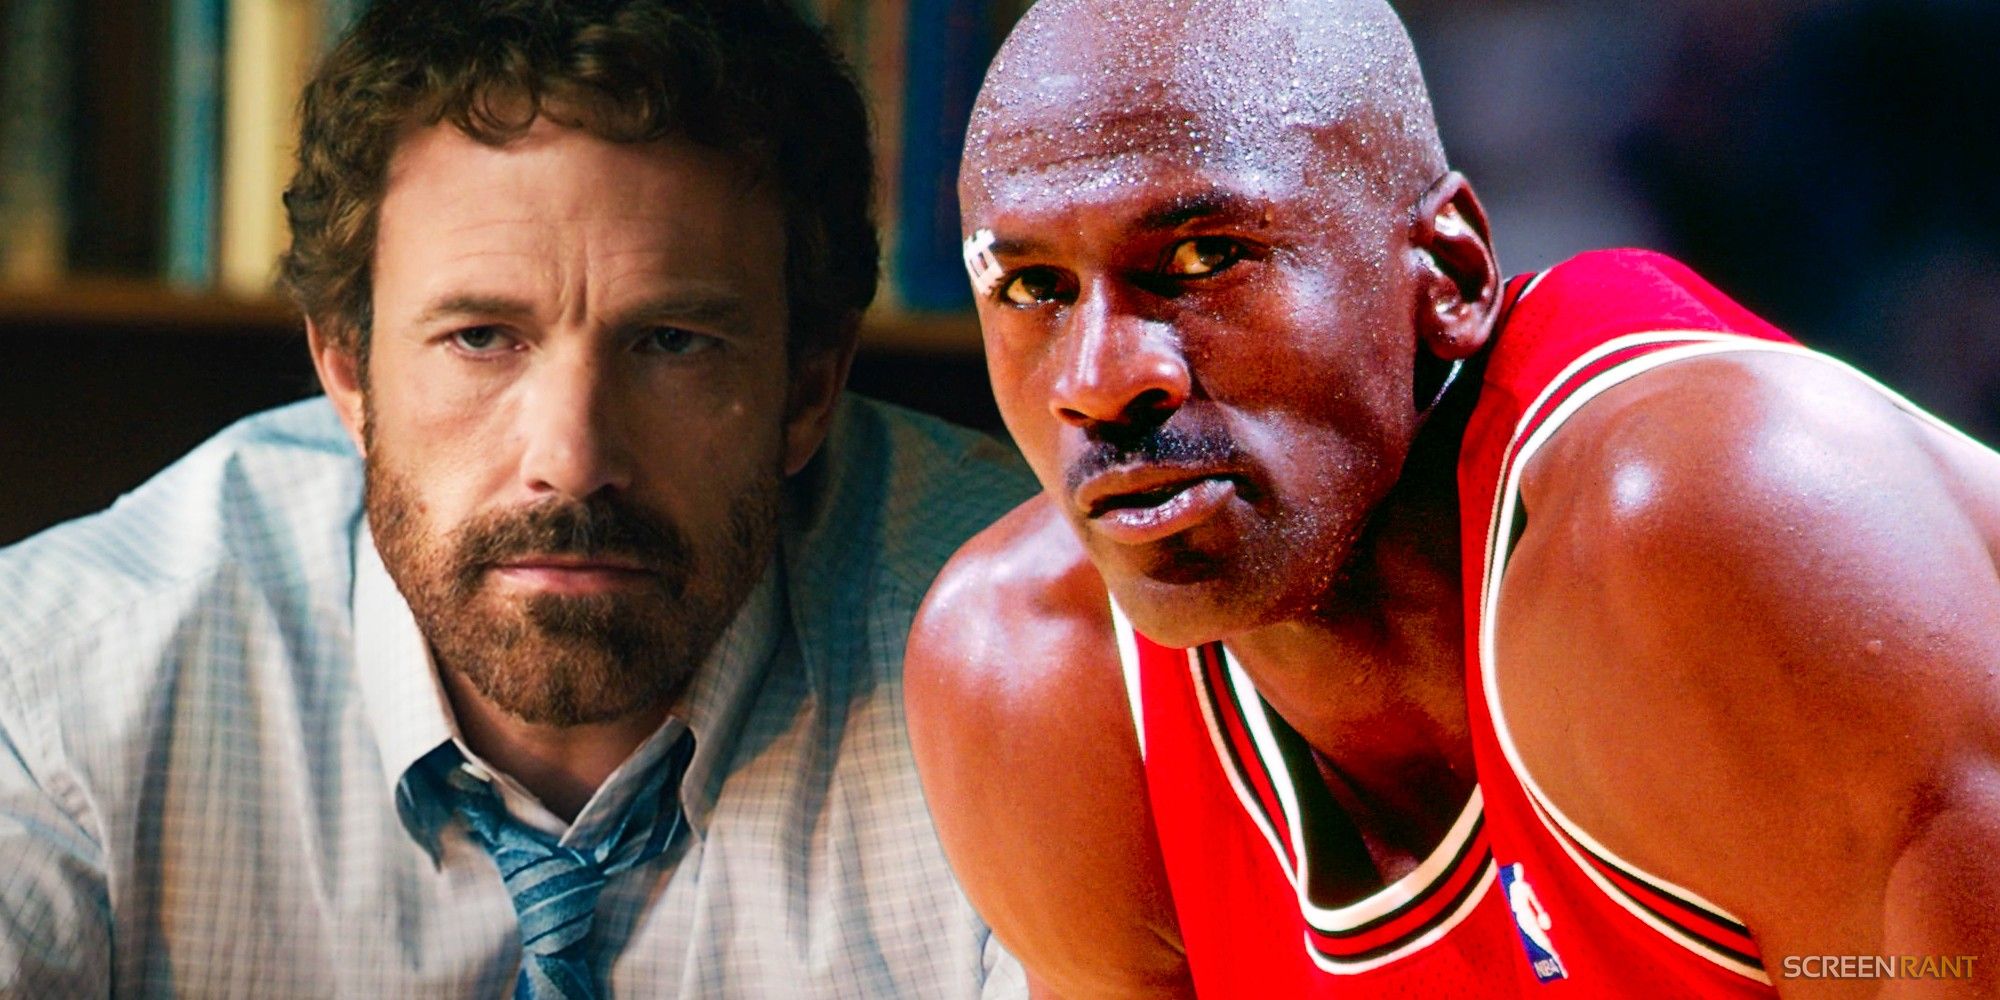 Blended image of Ben Affleck in the movie as a head of Nike's basketball division and Michael Jordan